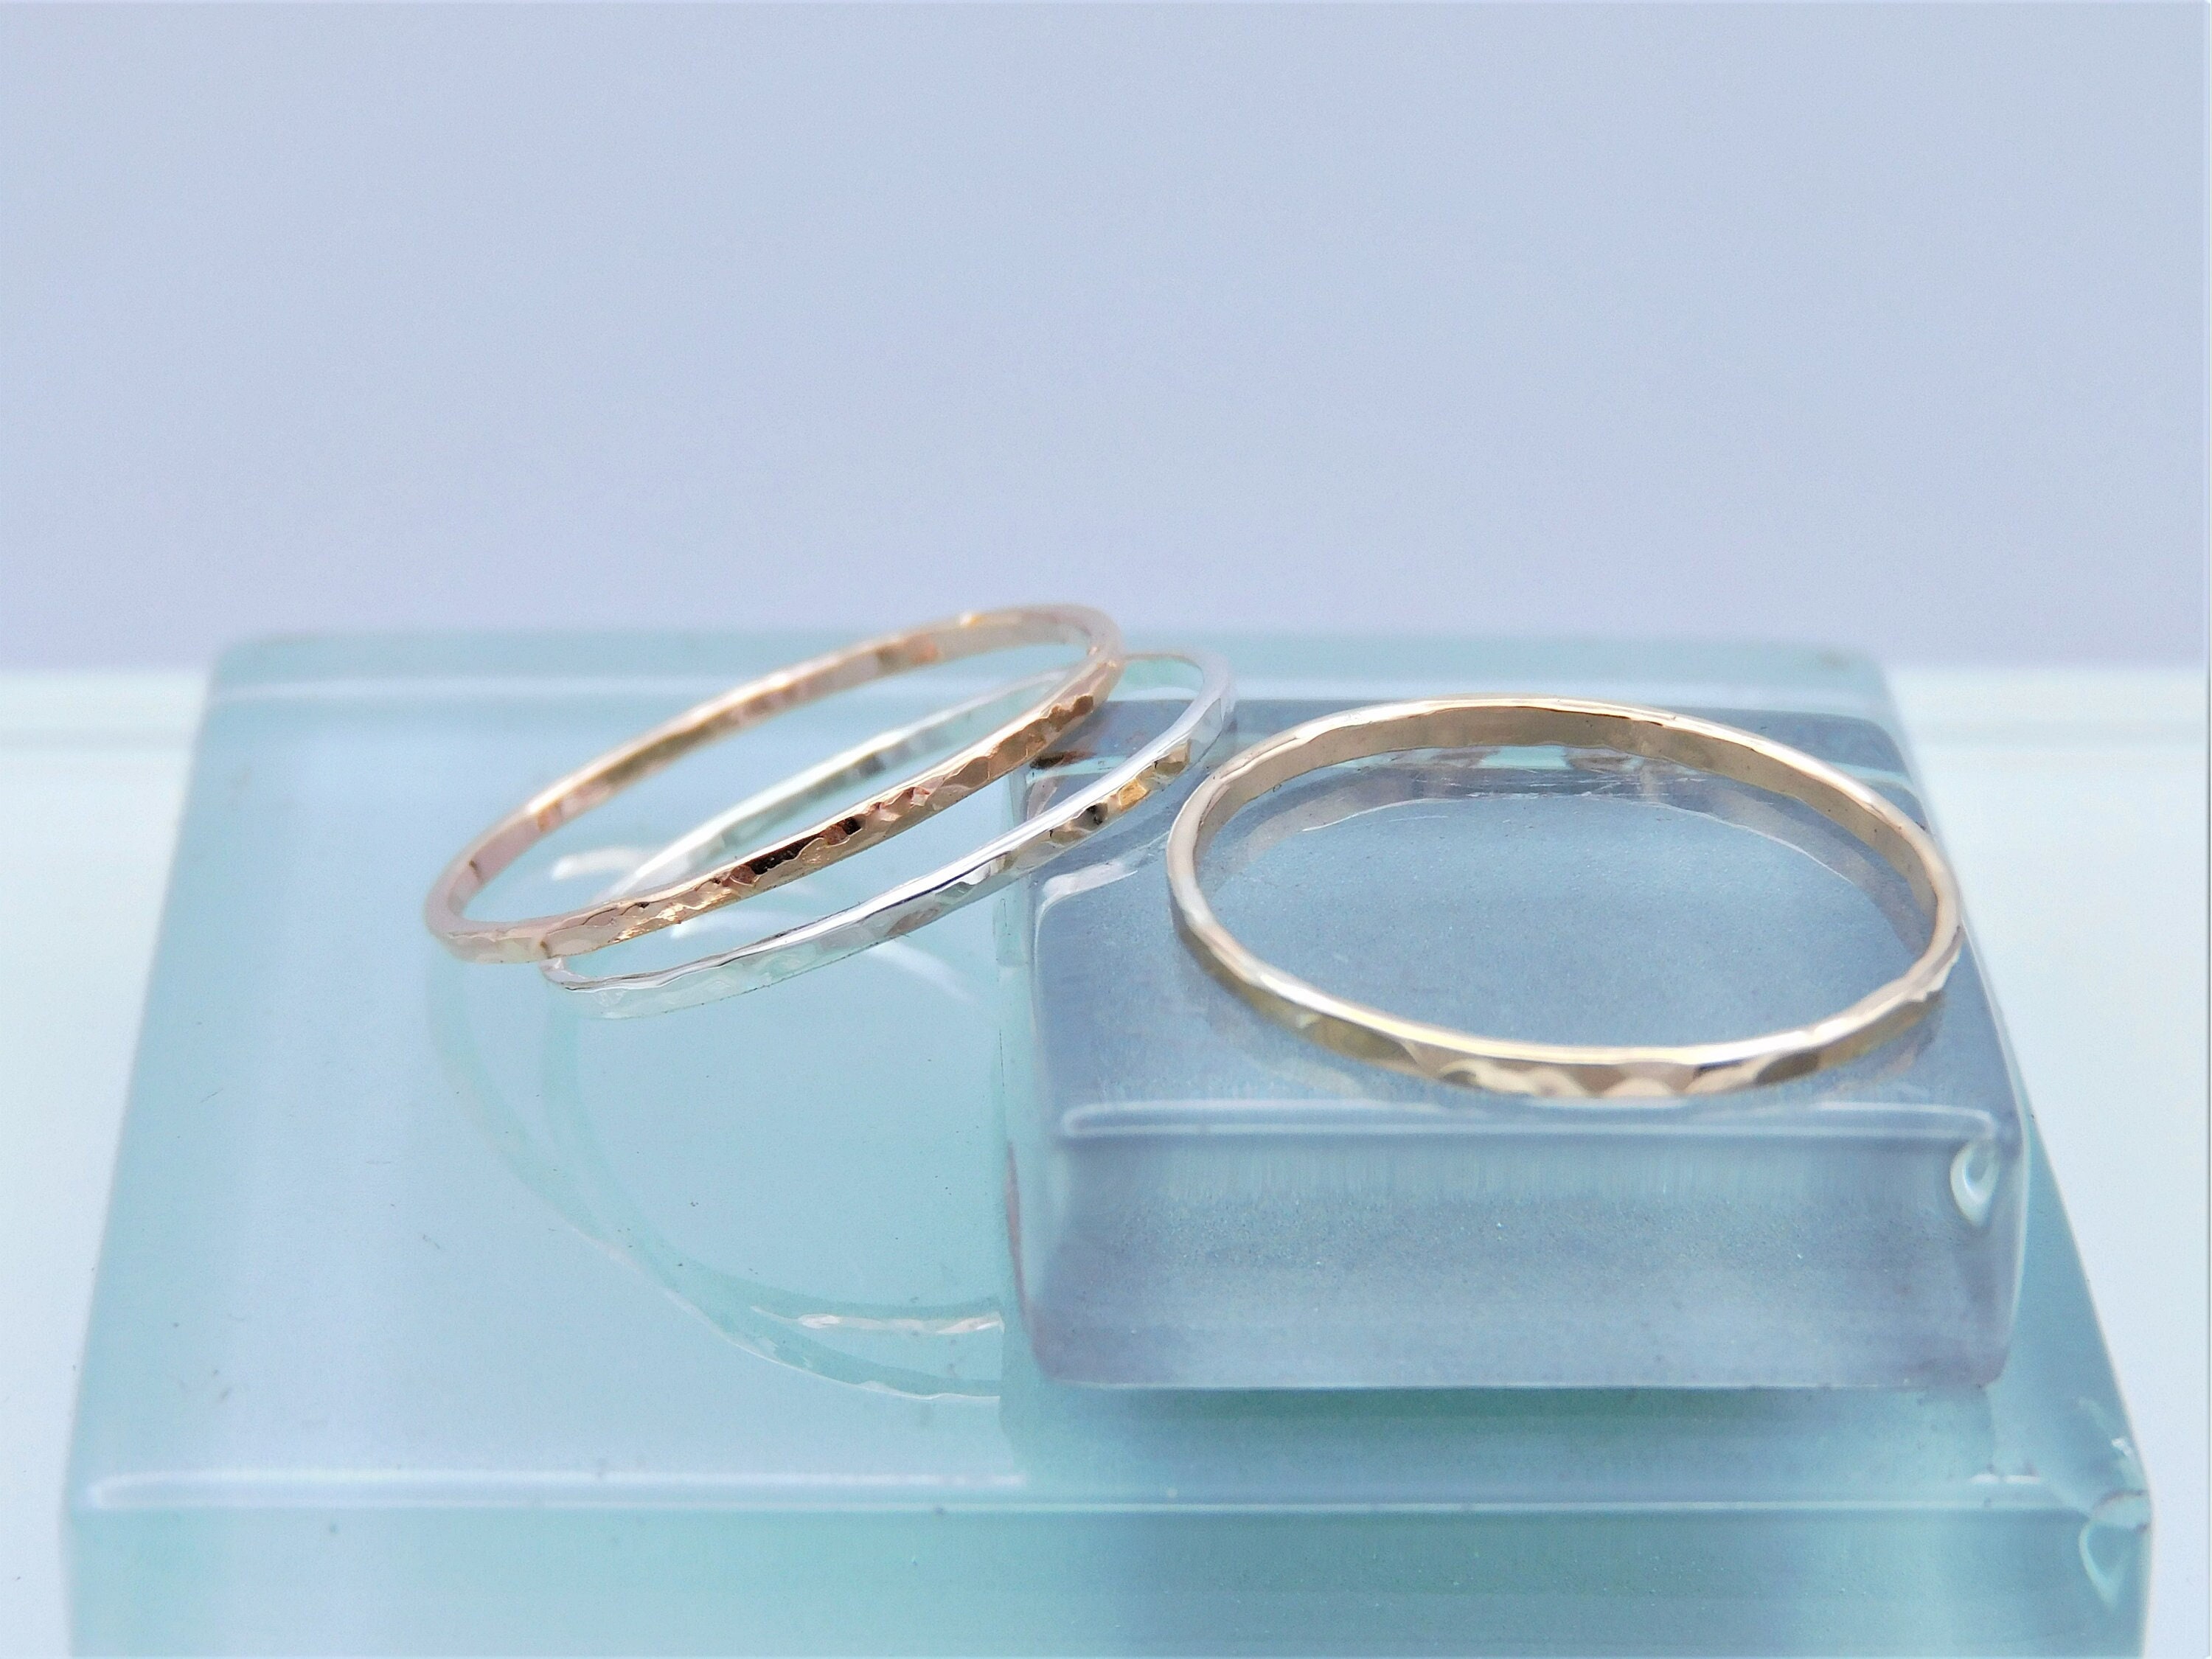 Gold, Rose Gold, and Silver Stacking Ring Set, 1mm or 1.3mm Wide 14K Gold  Filled, 14K Rose Gold Filled, & Sterling Silver Hammered Ring Set